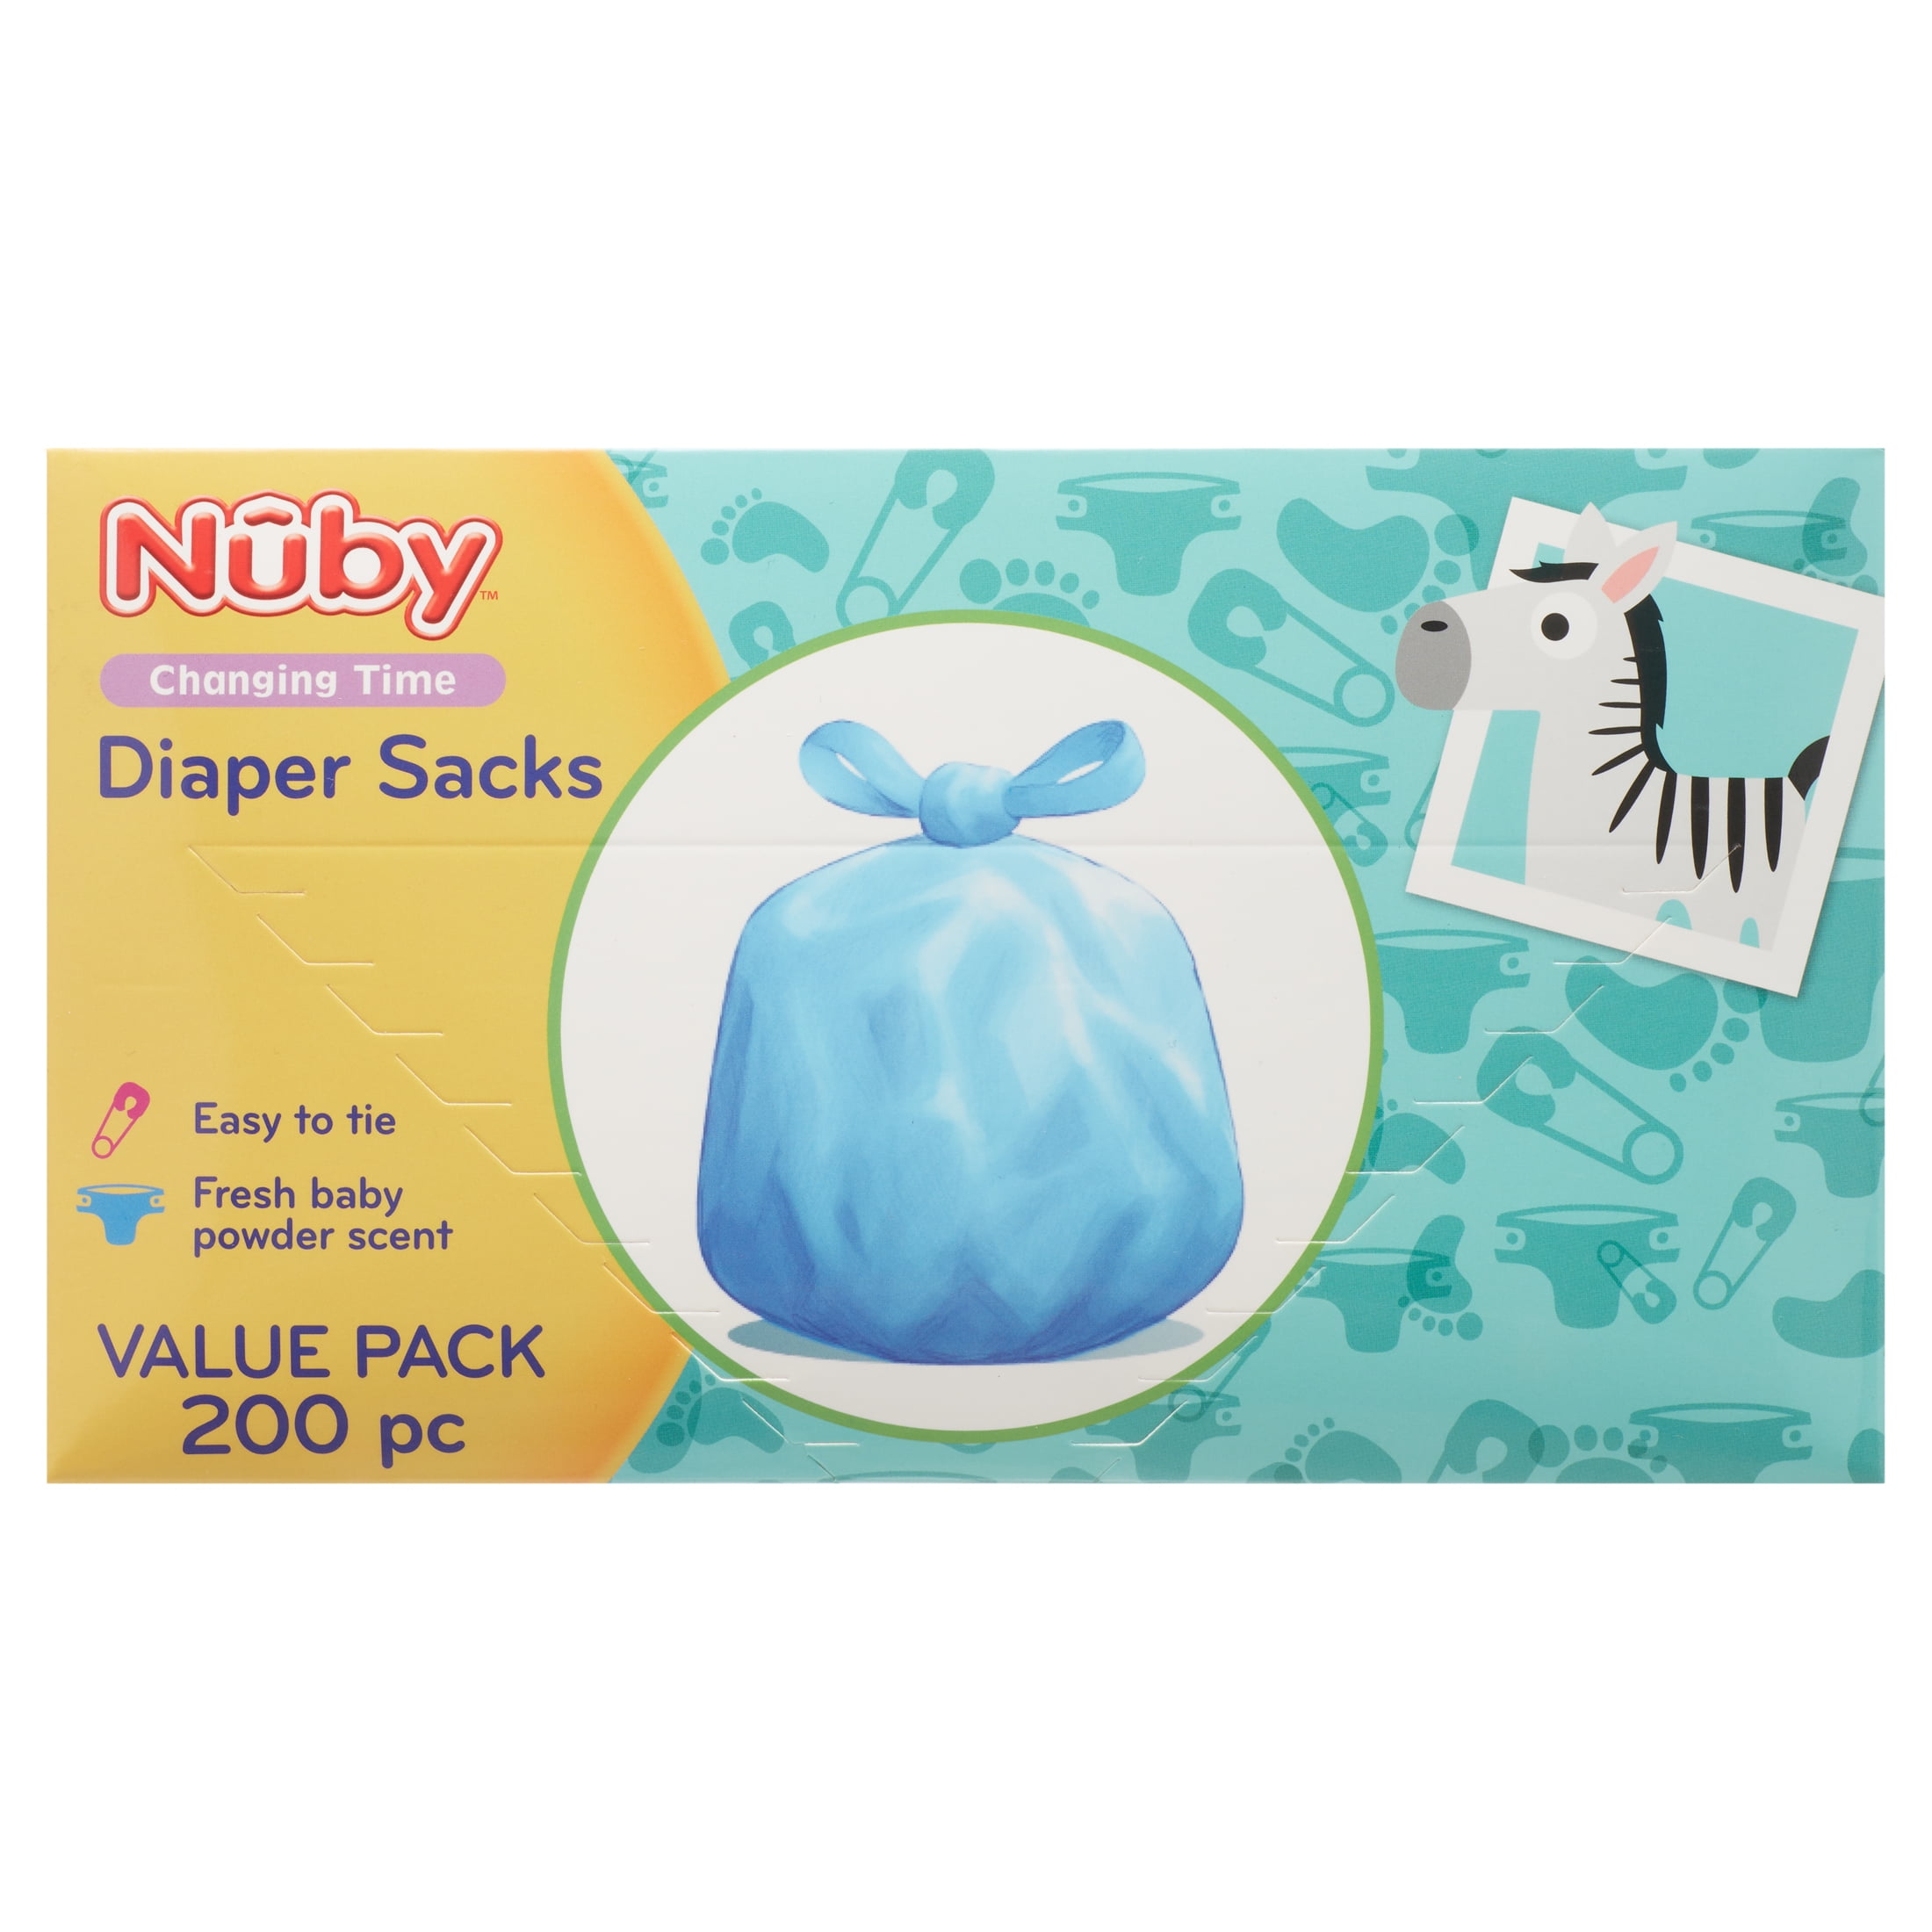 loose the temper Economy Monument Nuby Dirty Diaper Disposal Sacks, Scented, 200 Count - Walmart.com